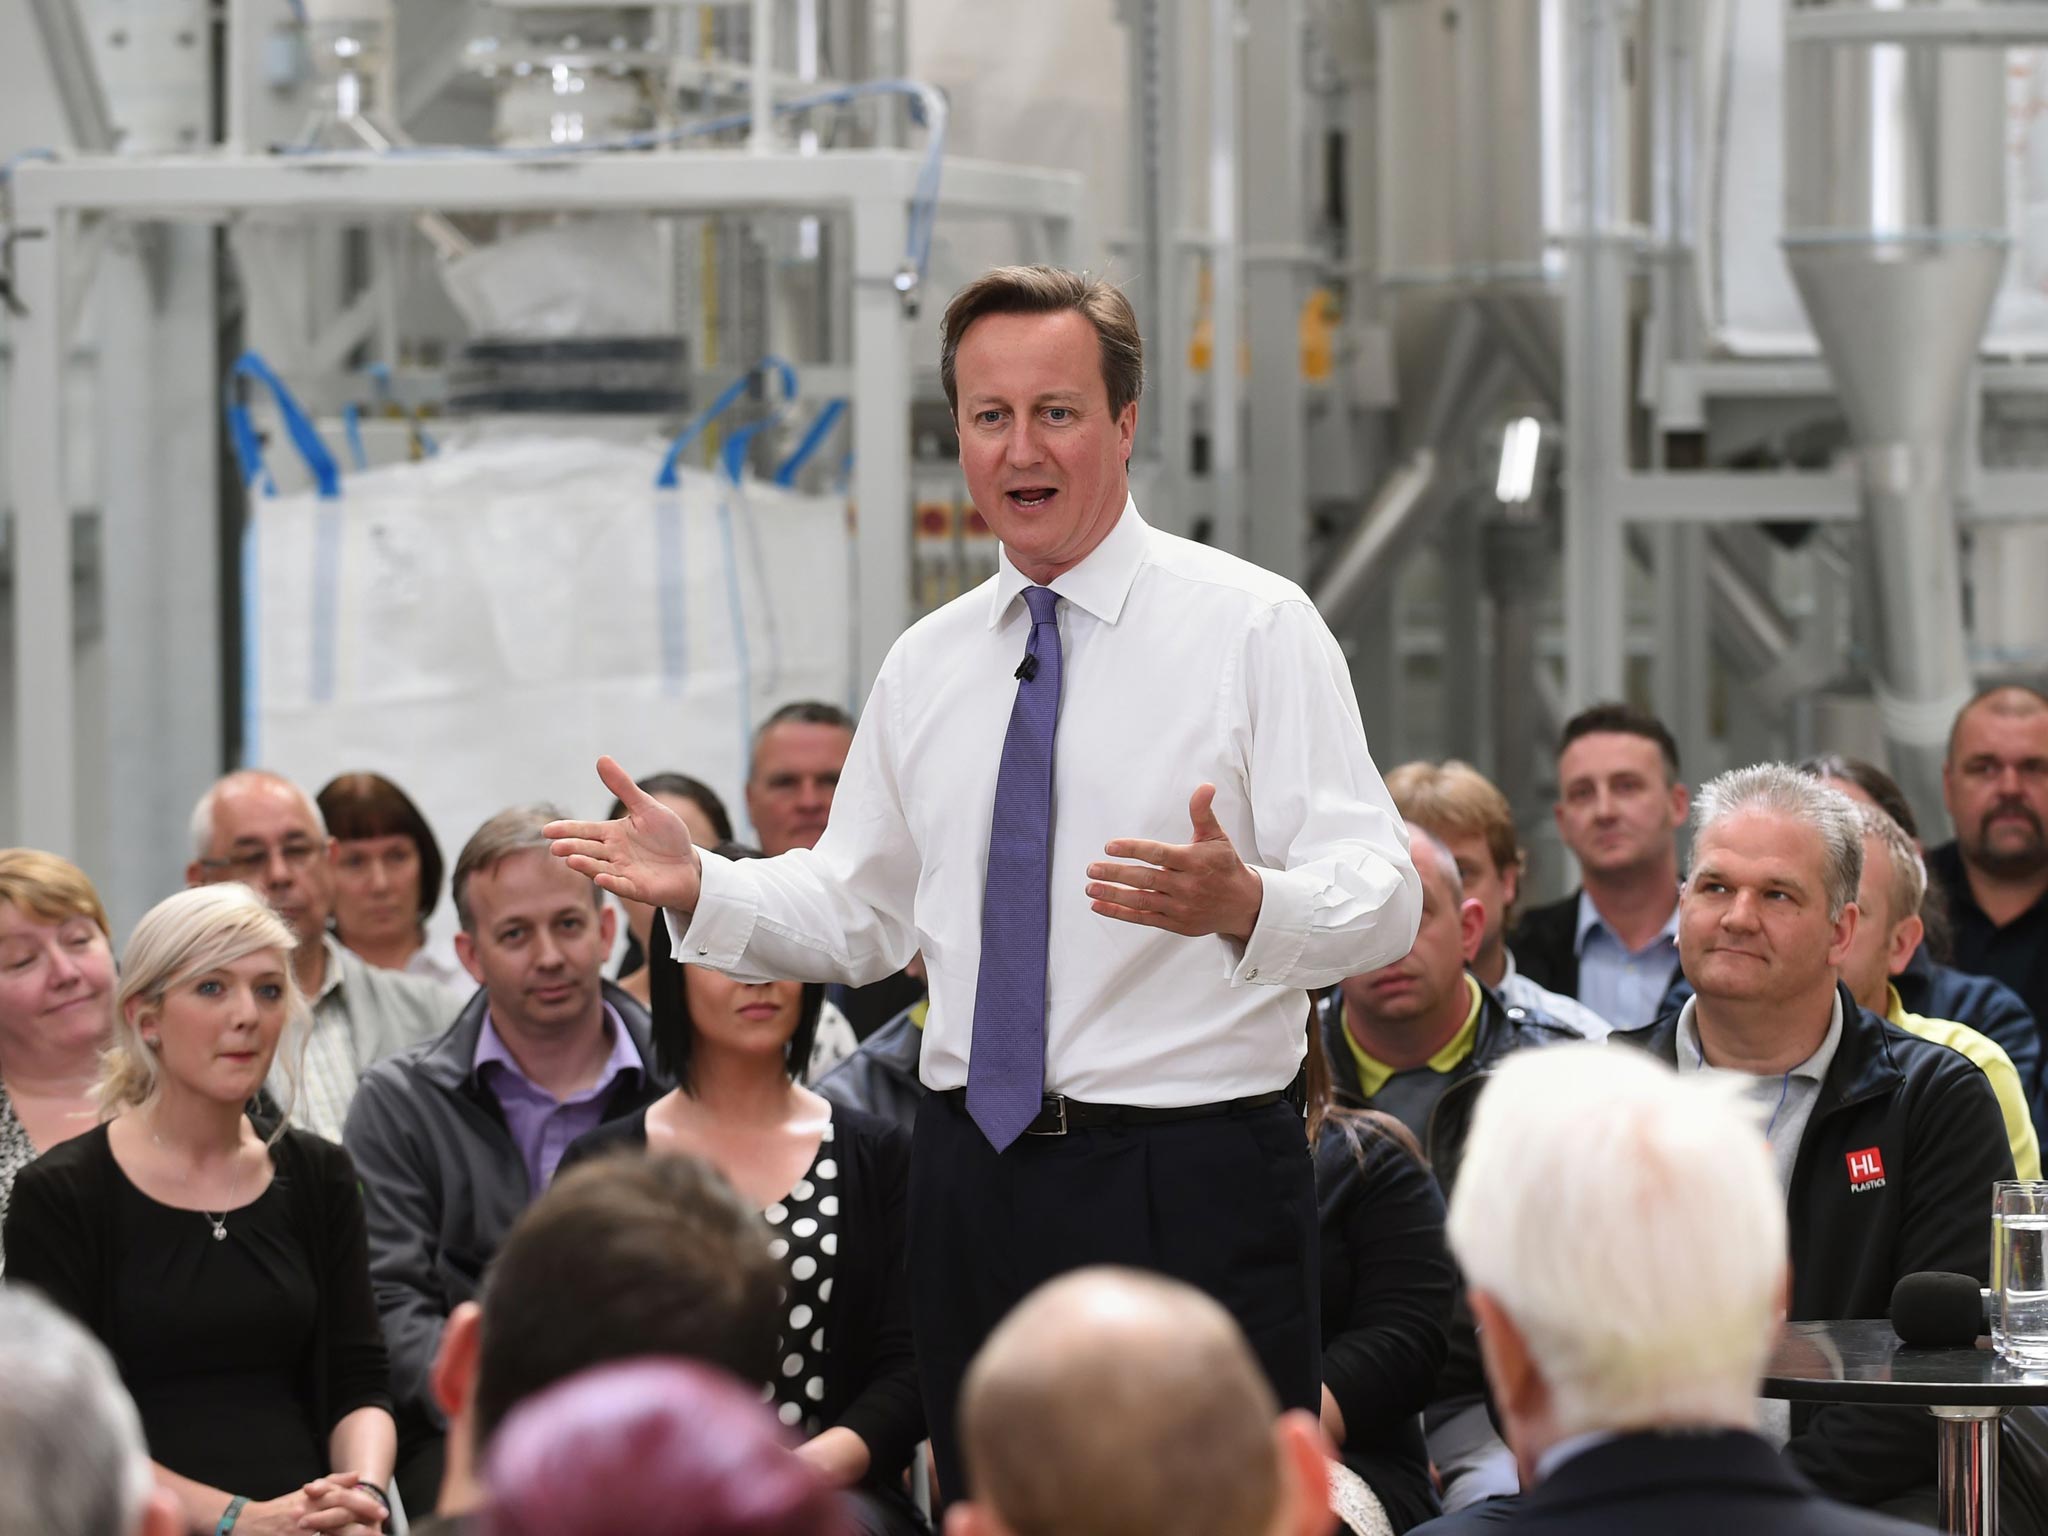 Prime Minister David Cameron has signalled his support for a five-way debate with the leaders of all the main parties